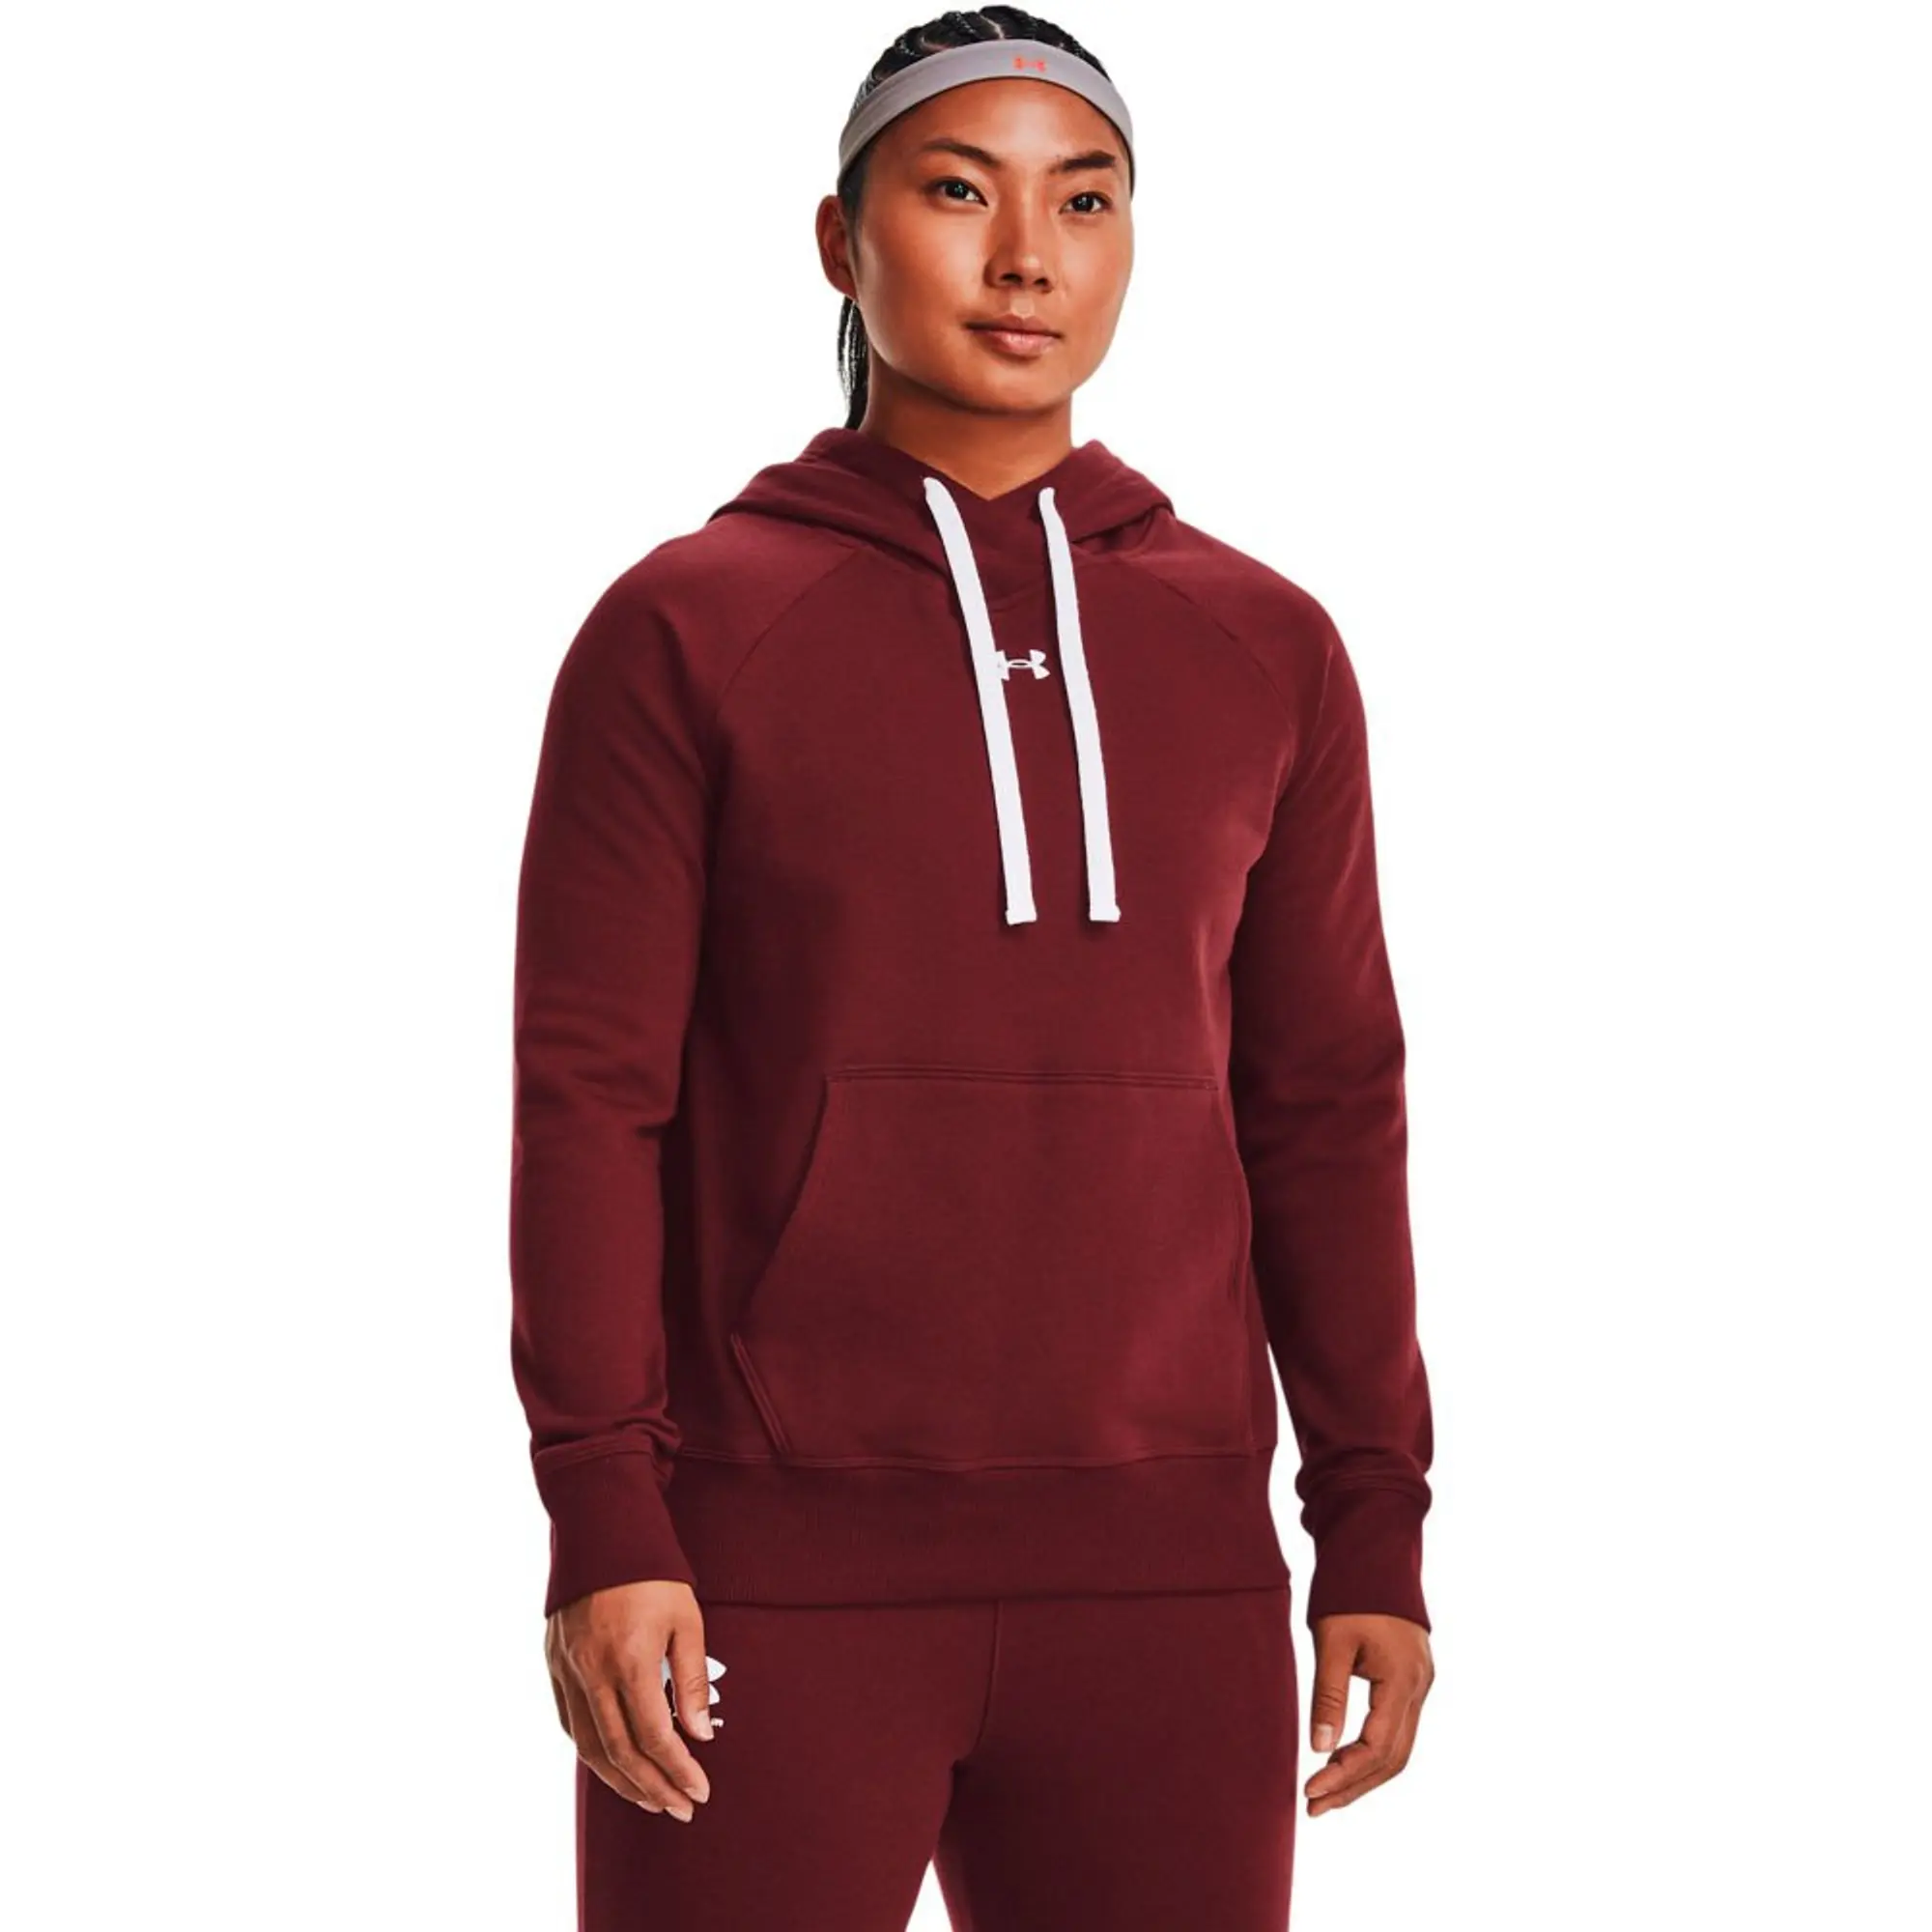 Under Armour Womens Rival Fleece Hoodie - Maroon Cotton